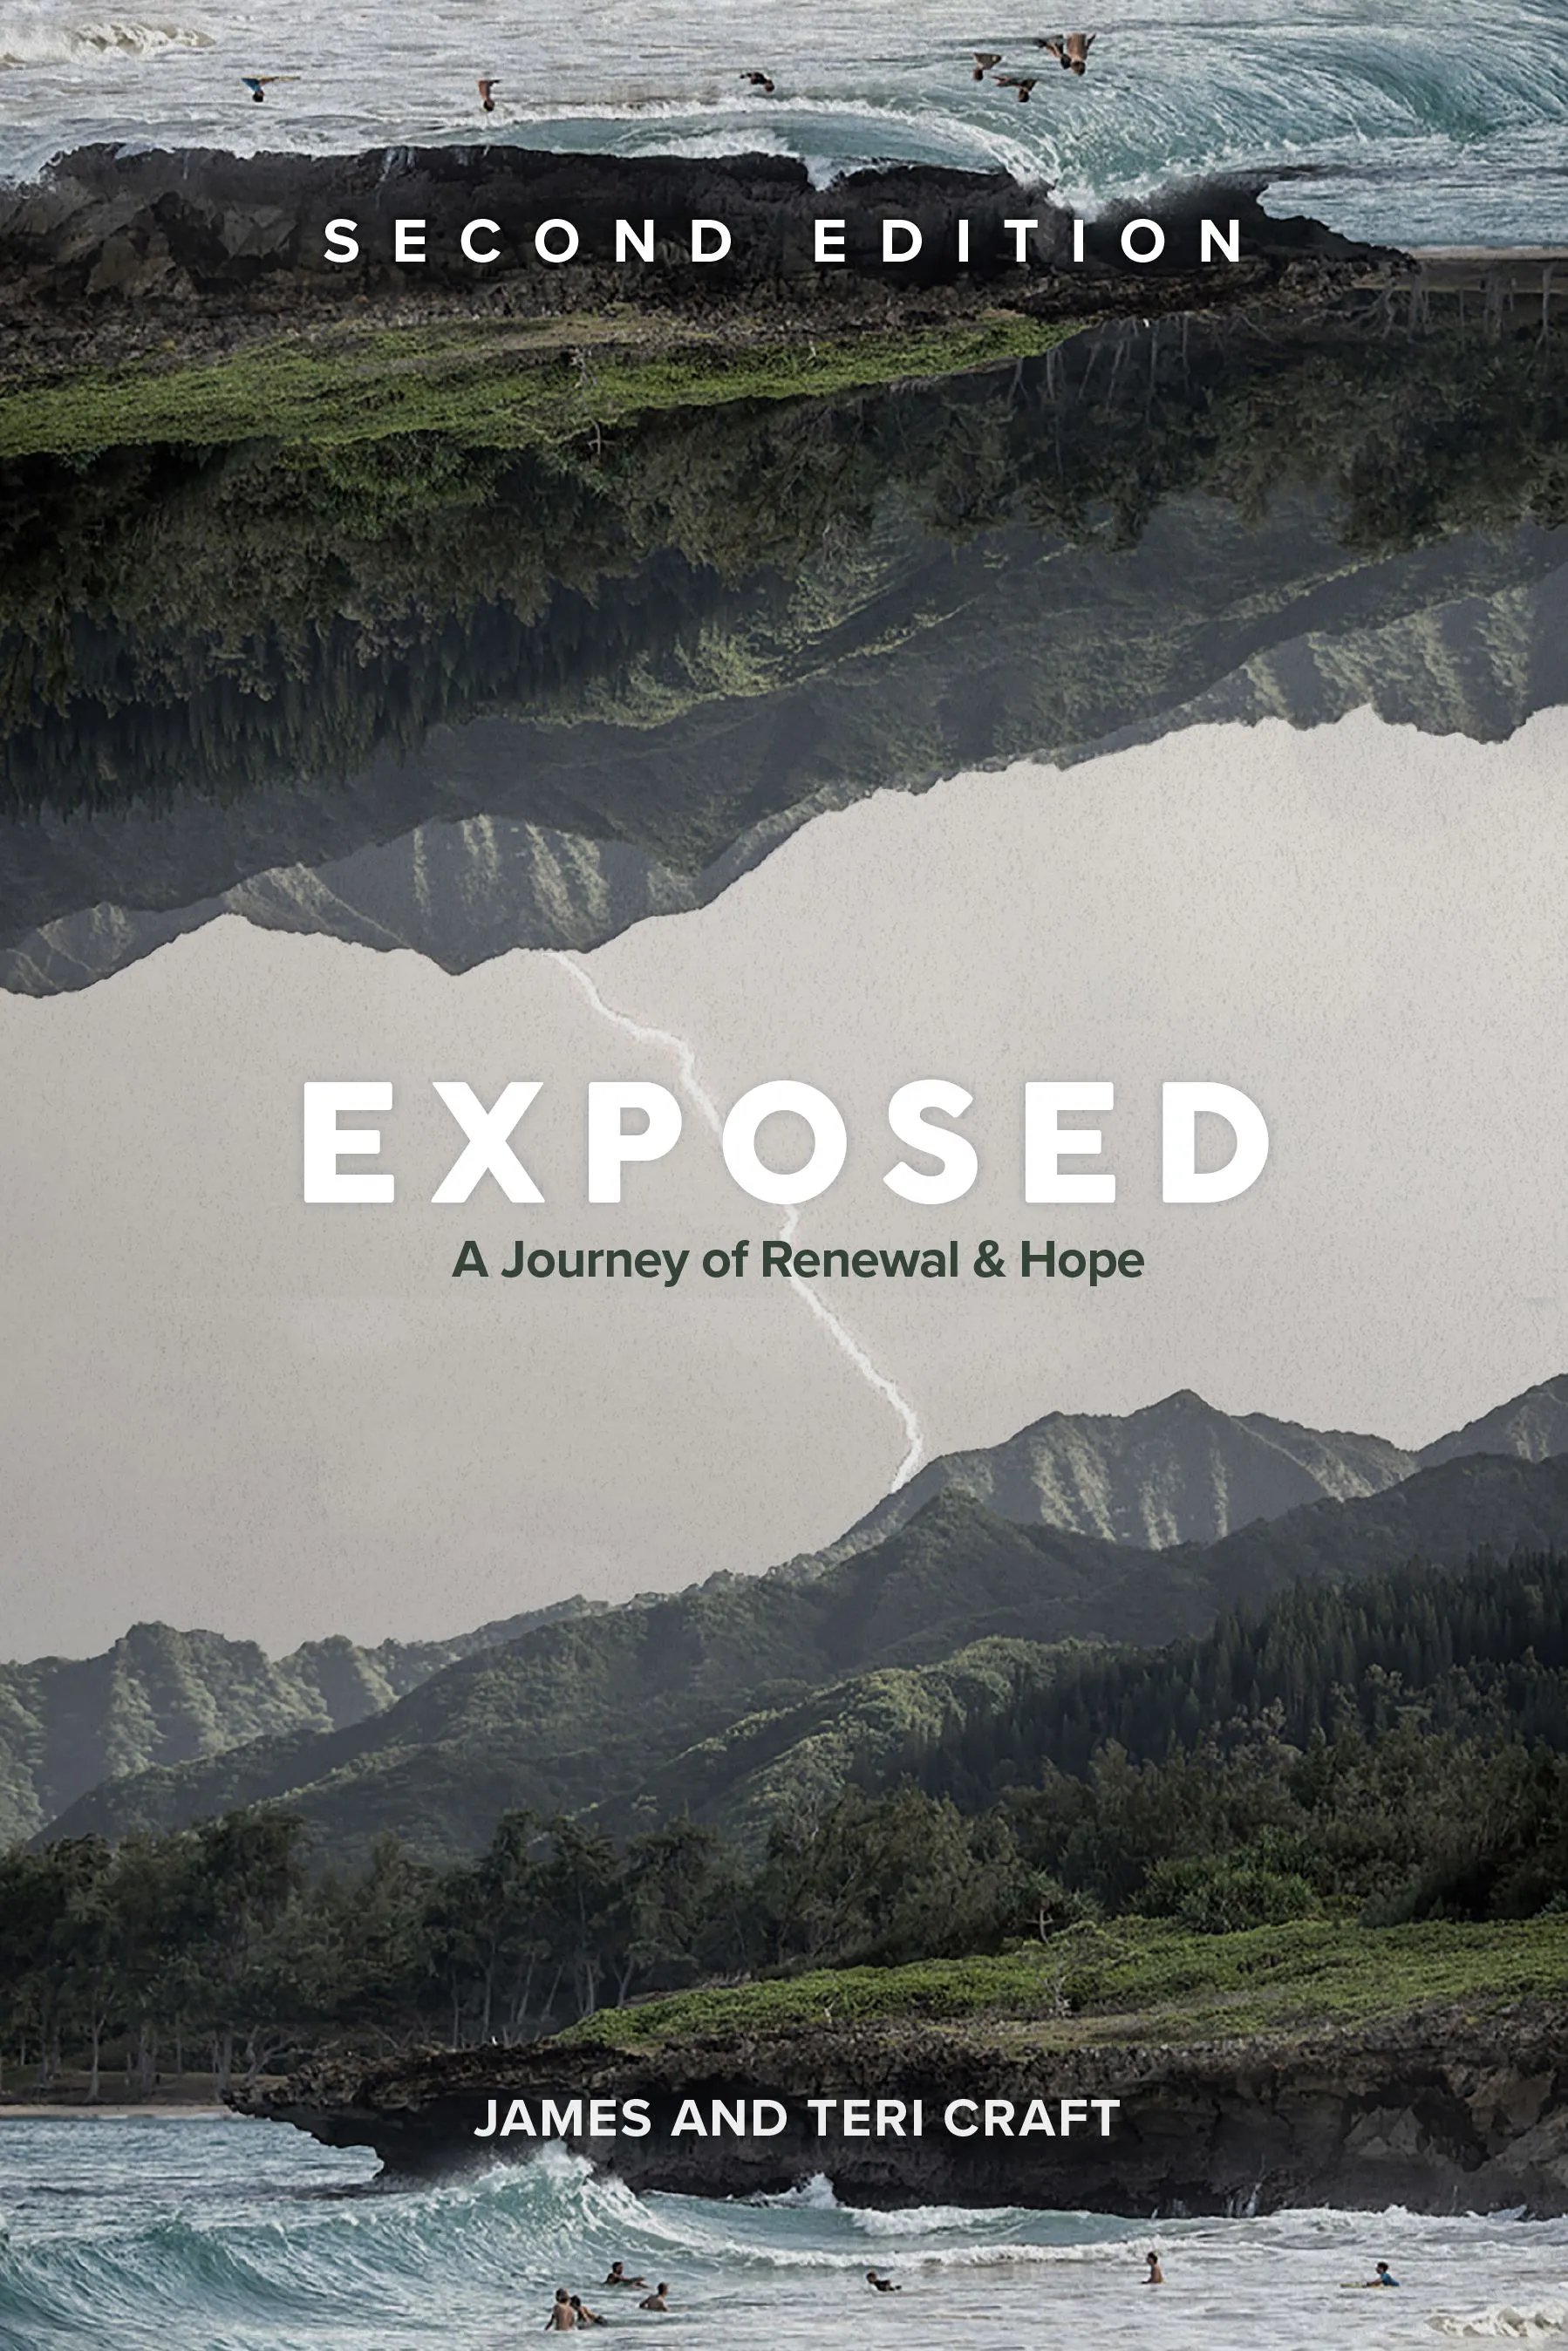 EXPOSED: A Journey Of Renewal & Hope by James and Teri Craft – Second Edition